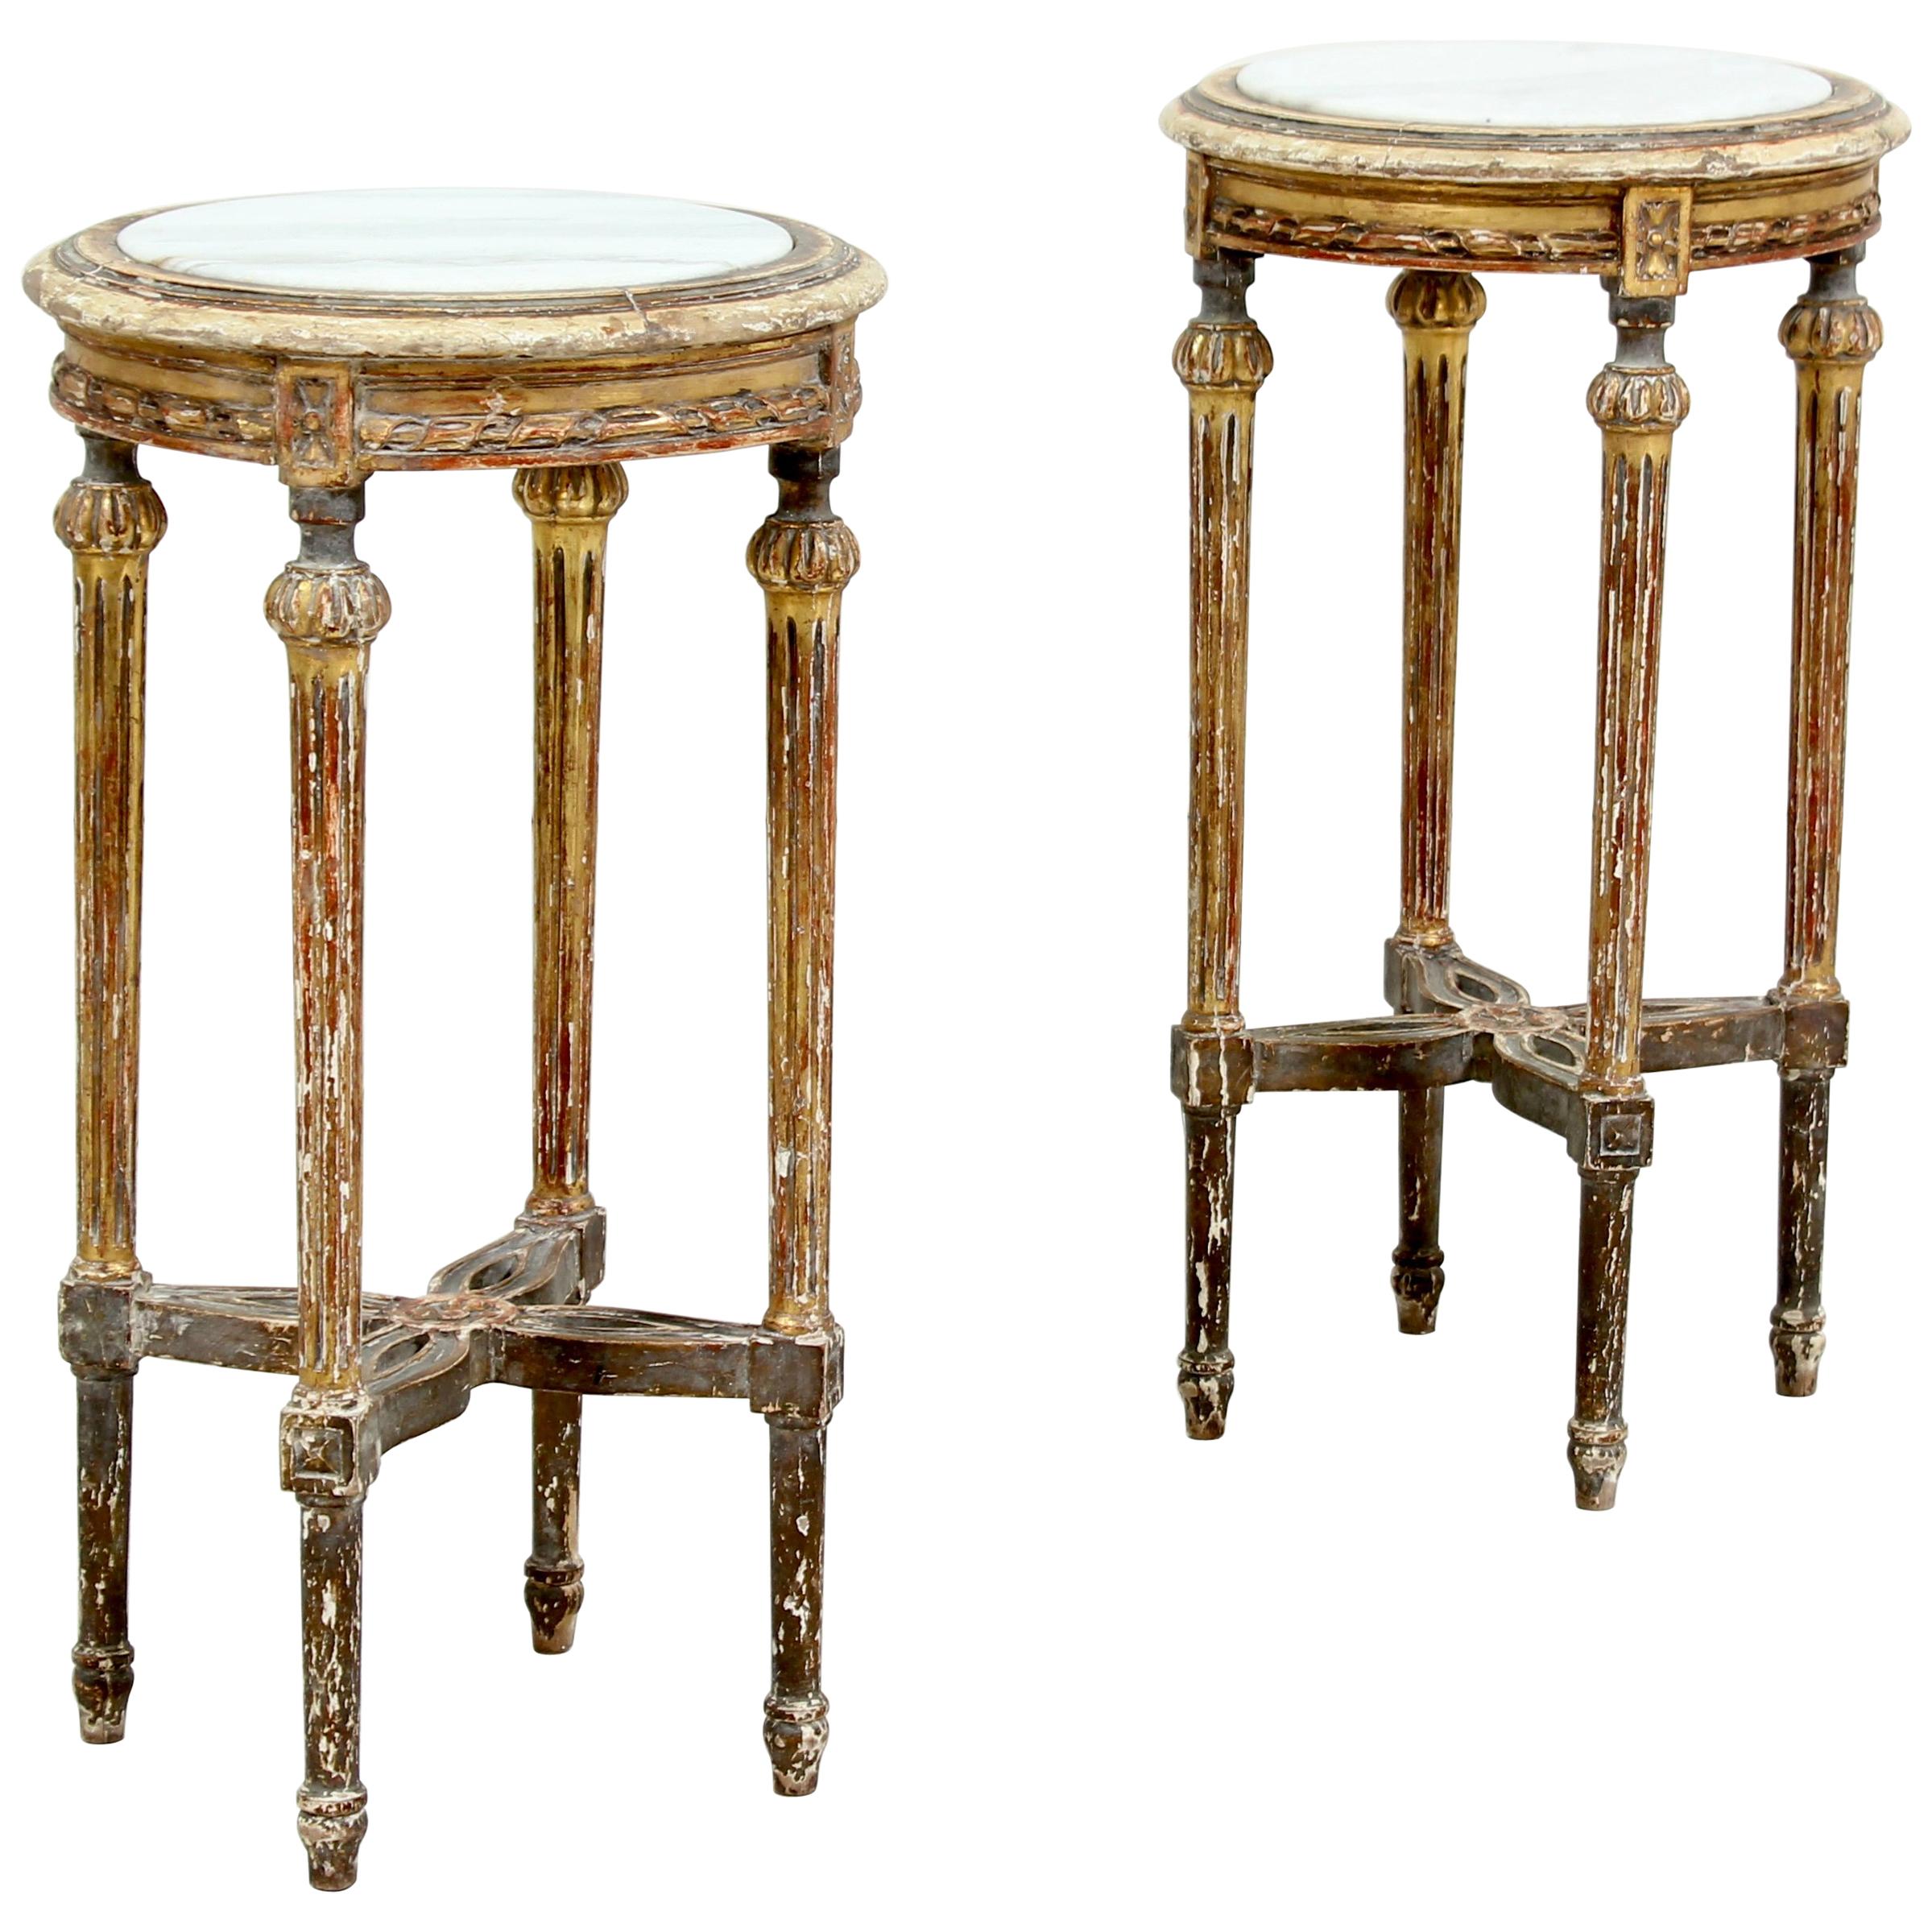 1920s French Louis XVI Giltwood Side Tables, a Pair